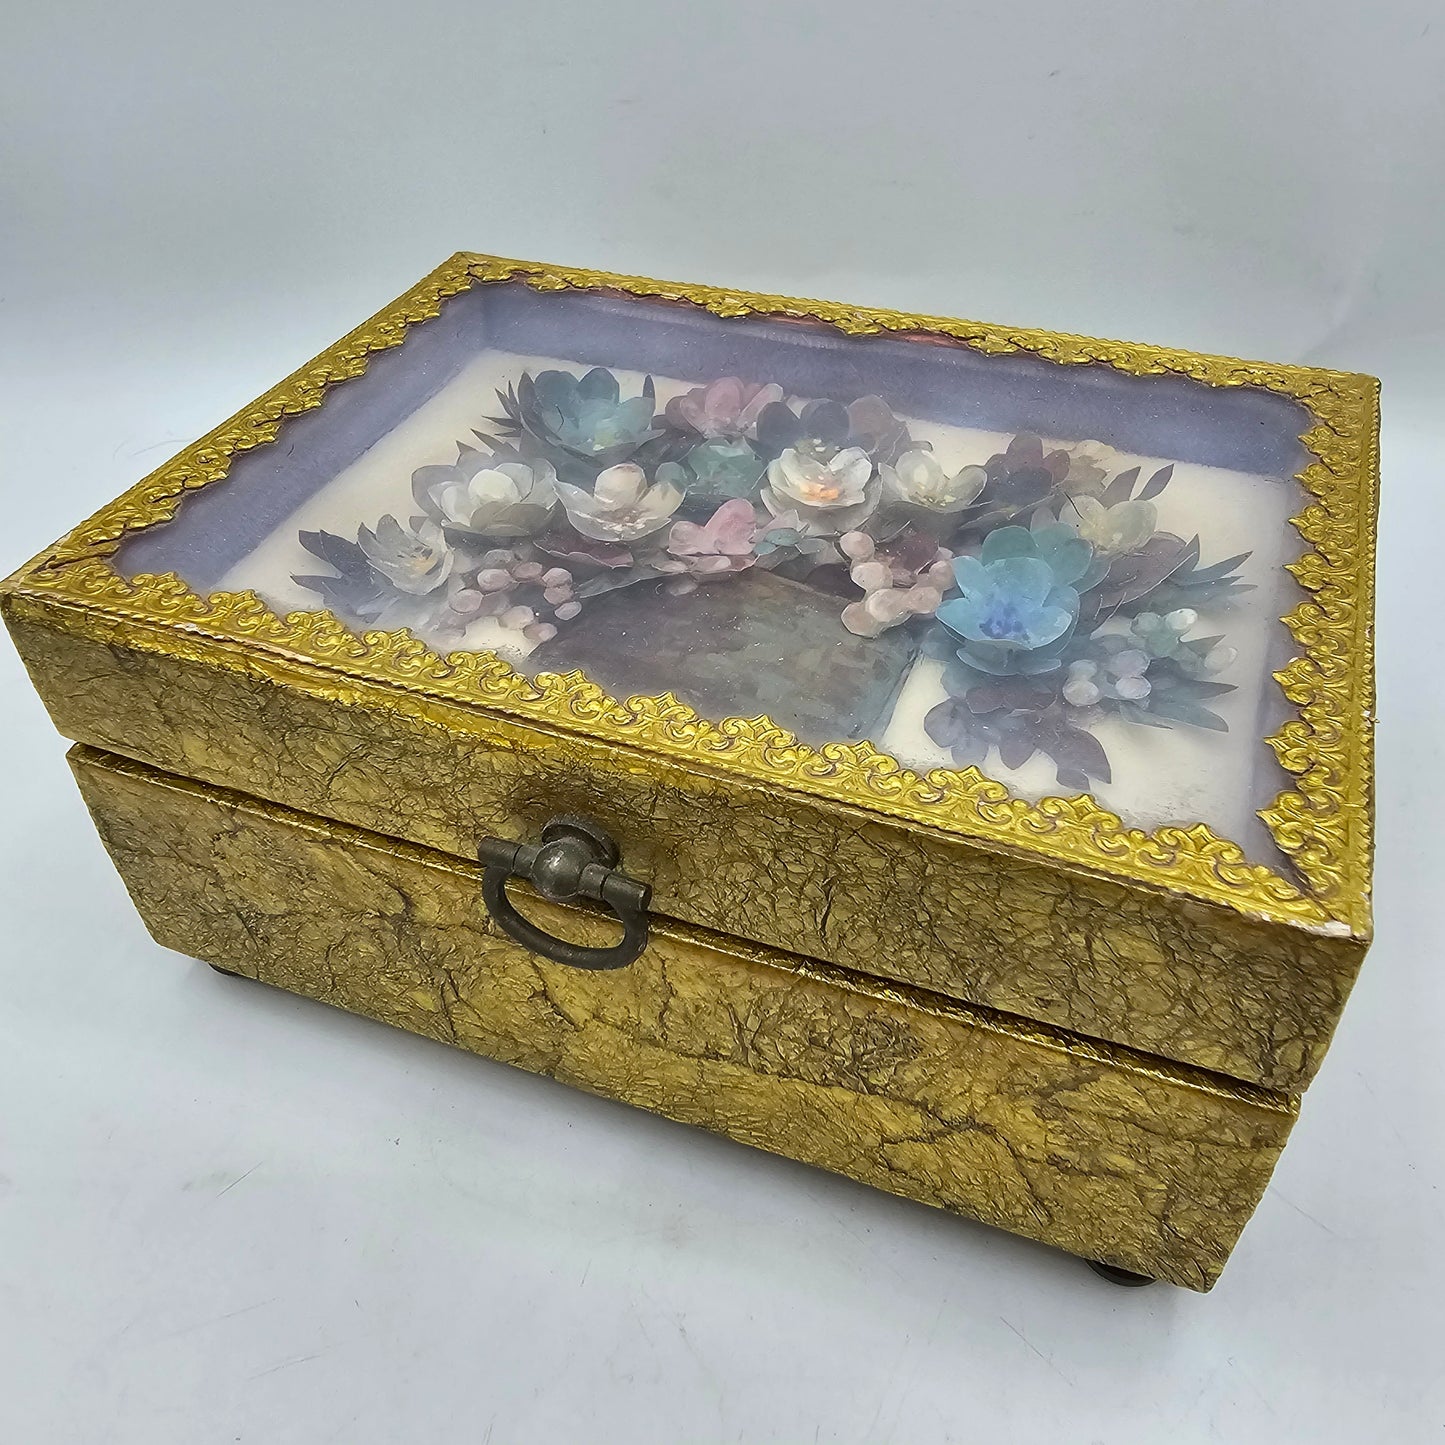 Hinged Jewelry Box with 3D Floral Presentation in the Lid